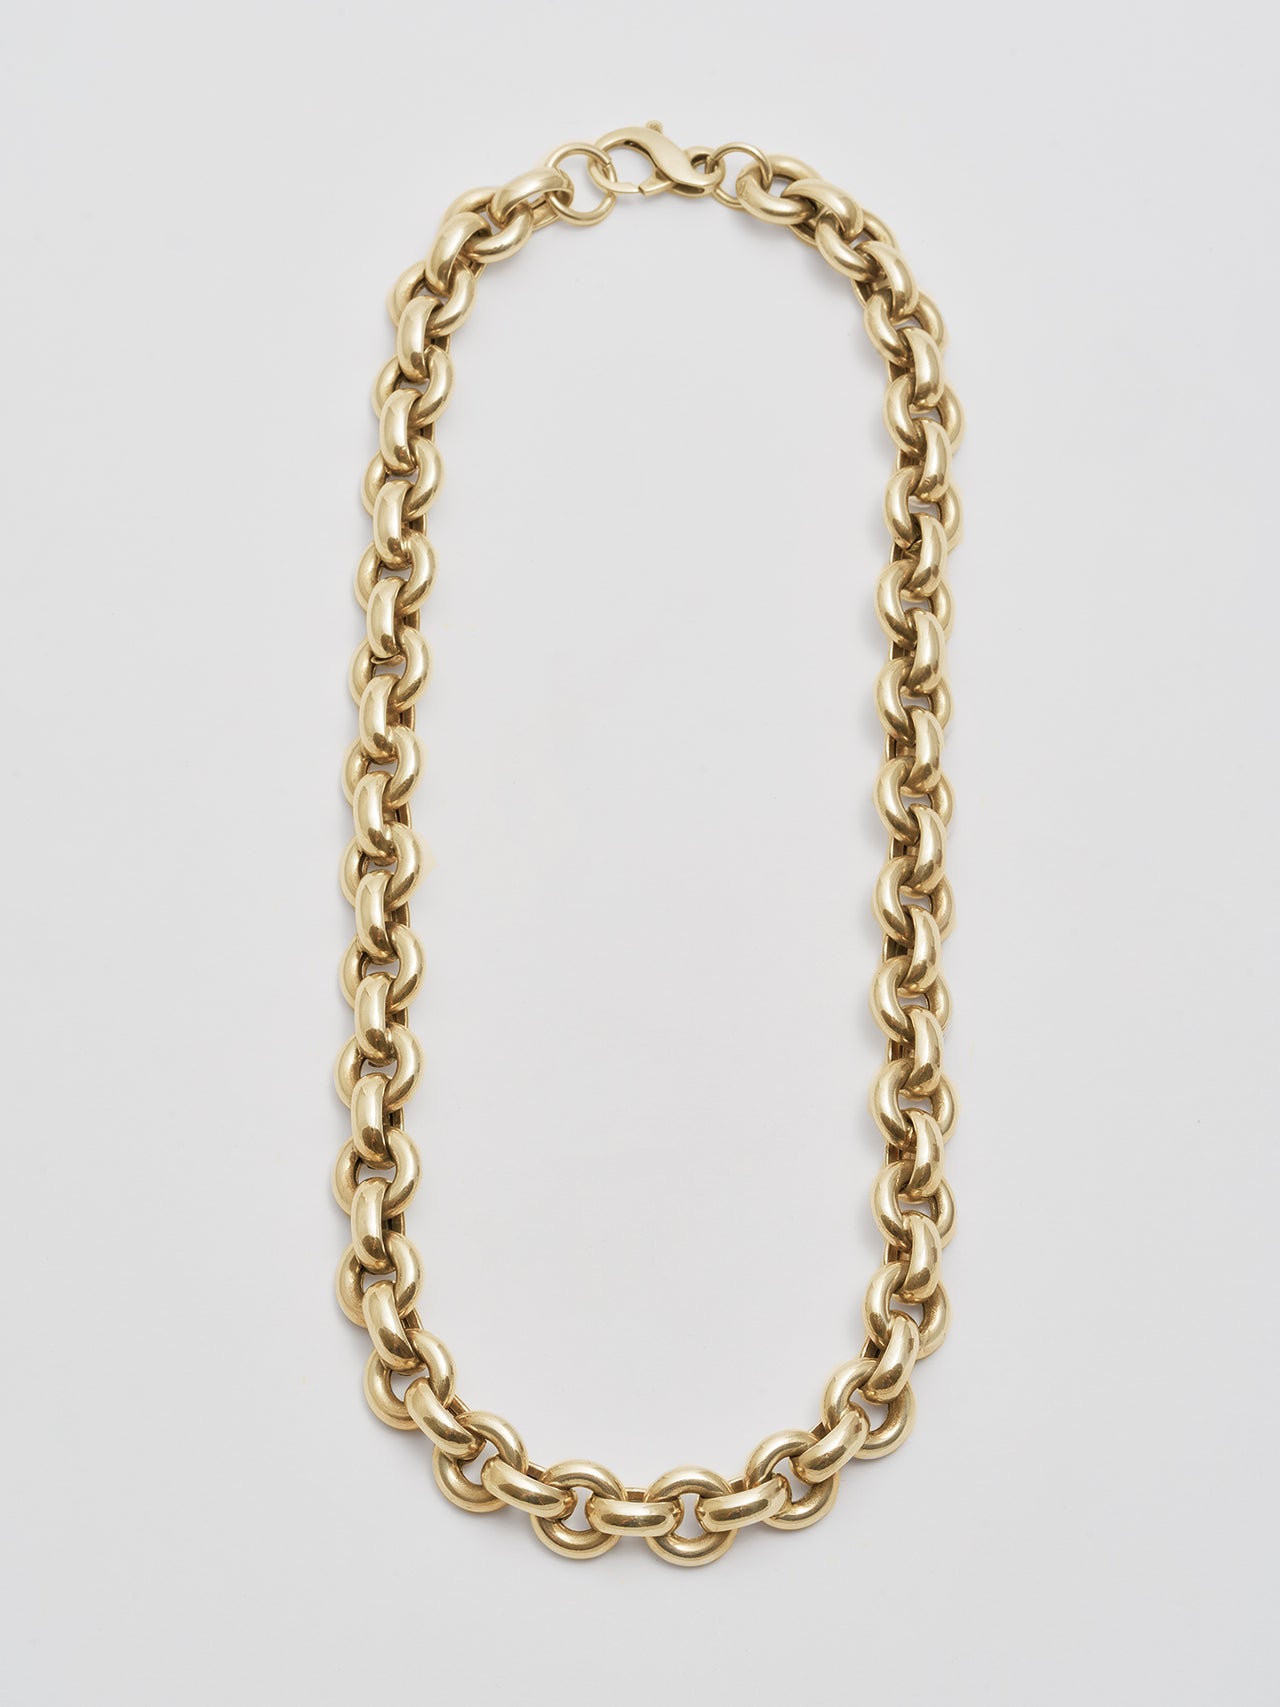 Euclid Necklace: Vermeil Hollow Link Chainp pictured on lightgrey background.